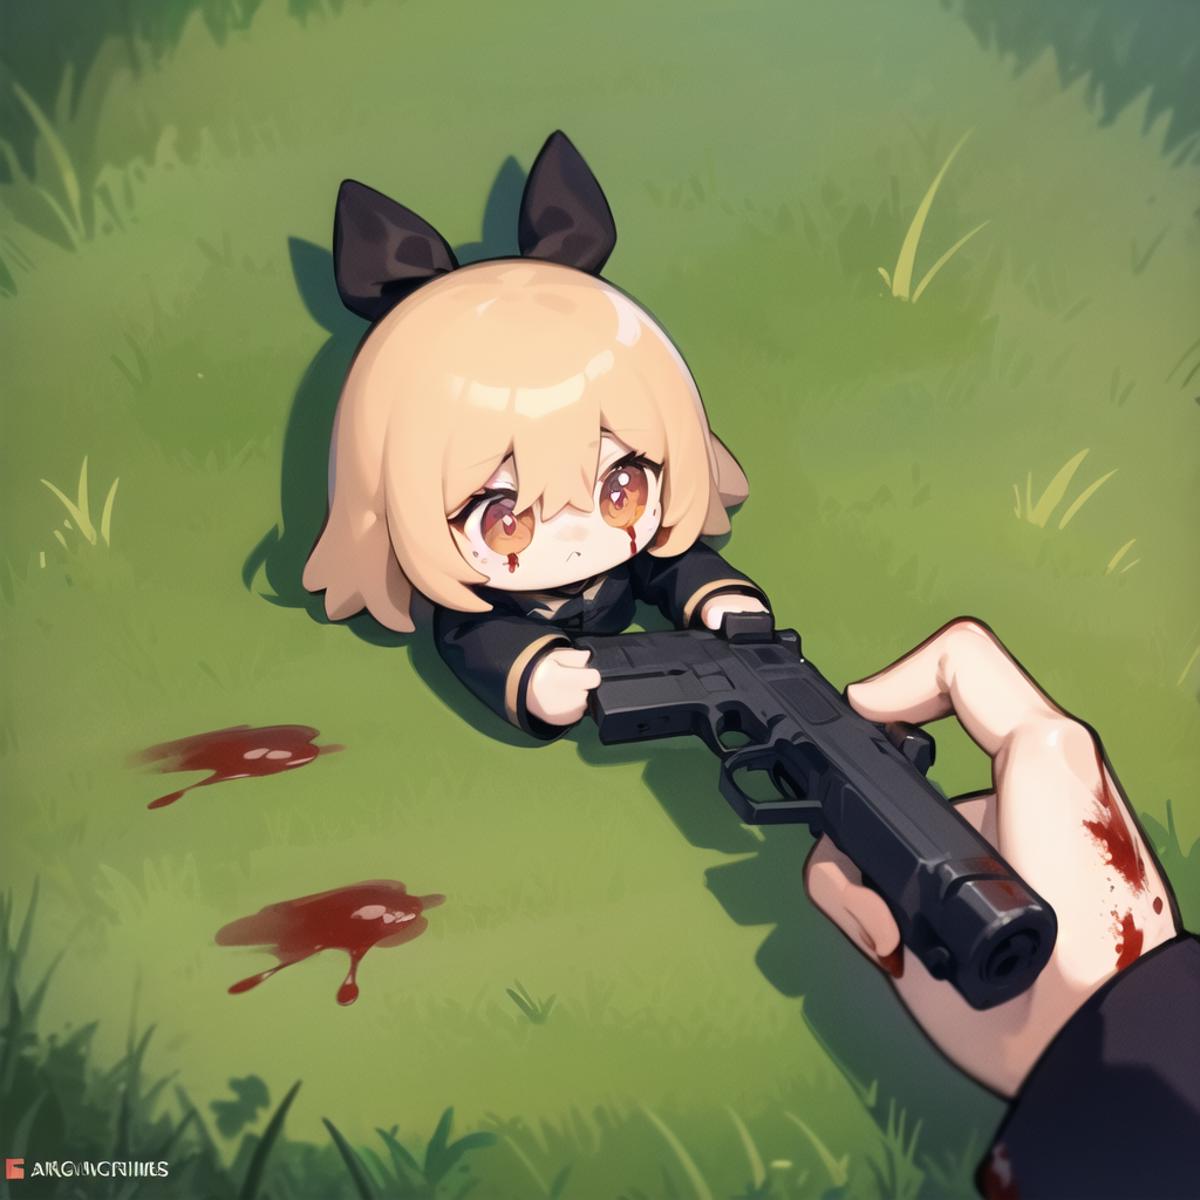 A cartoon image of a baby girl on the grass with a gun pointed at her.